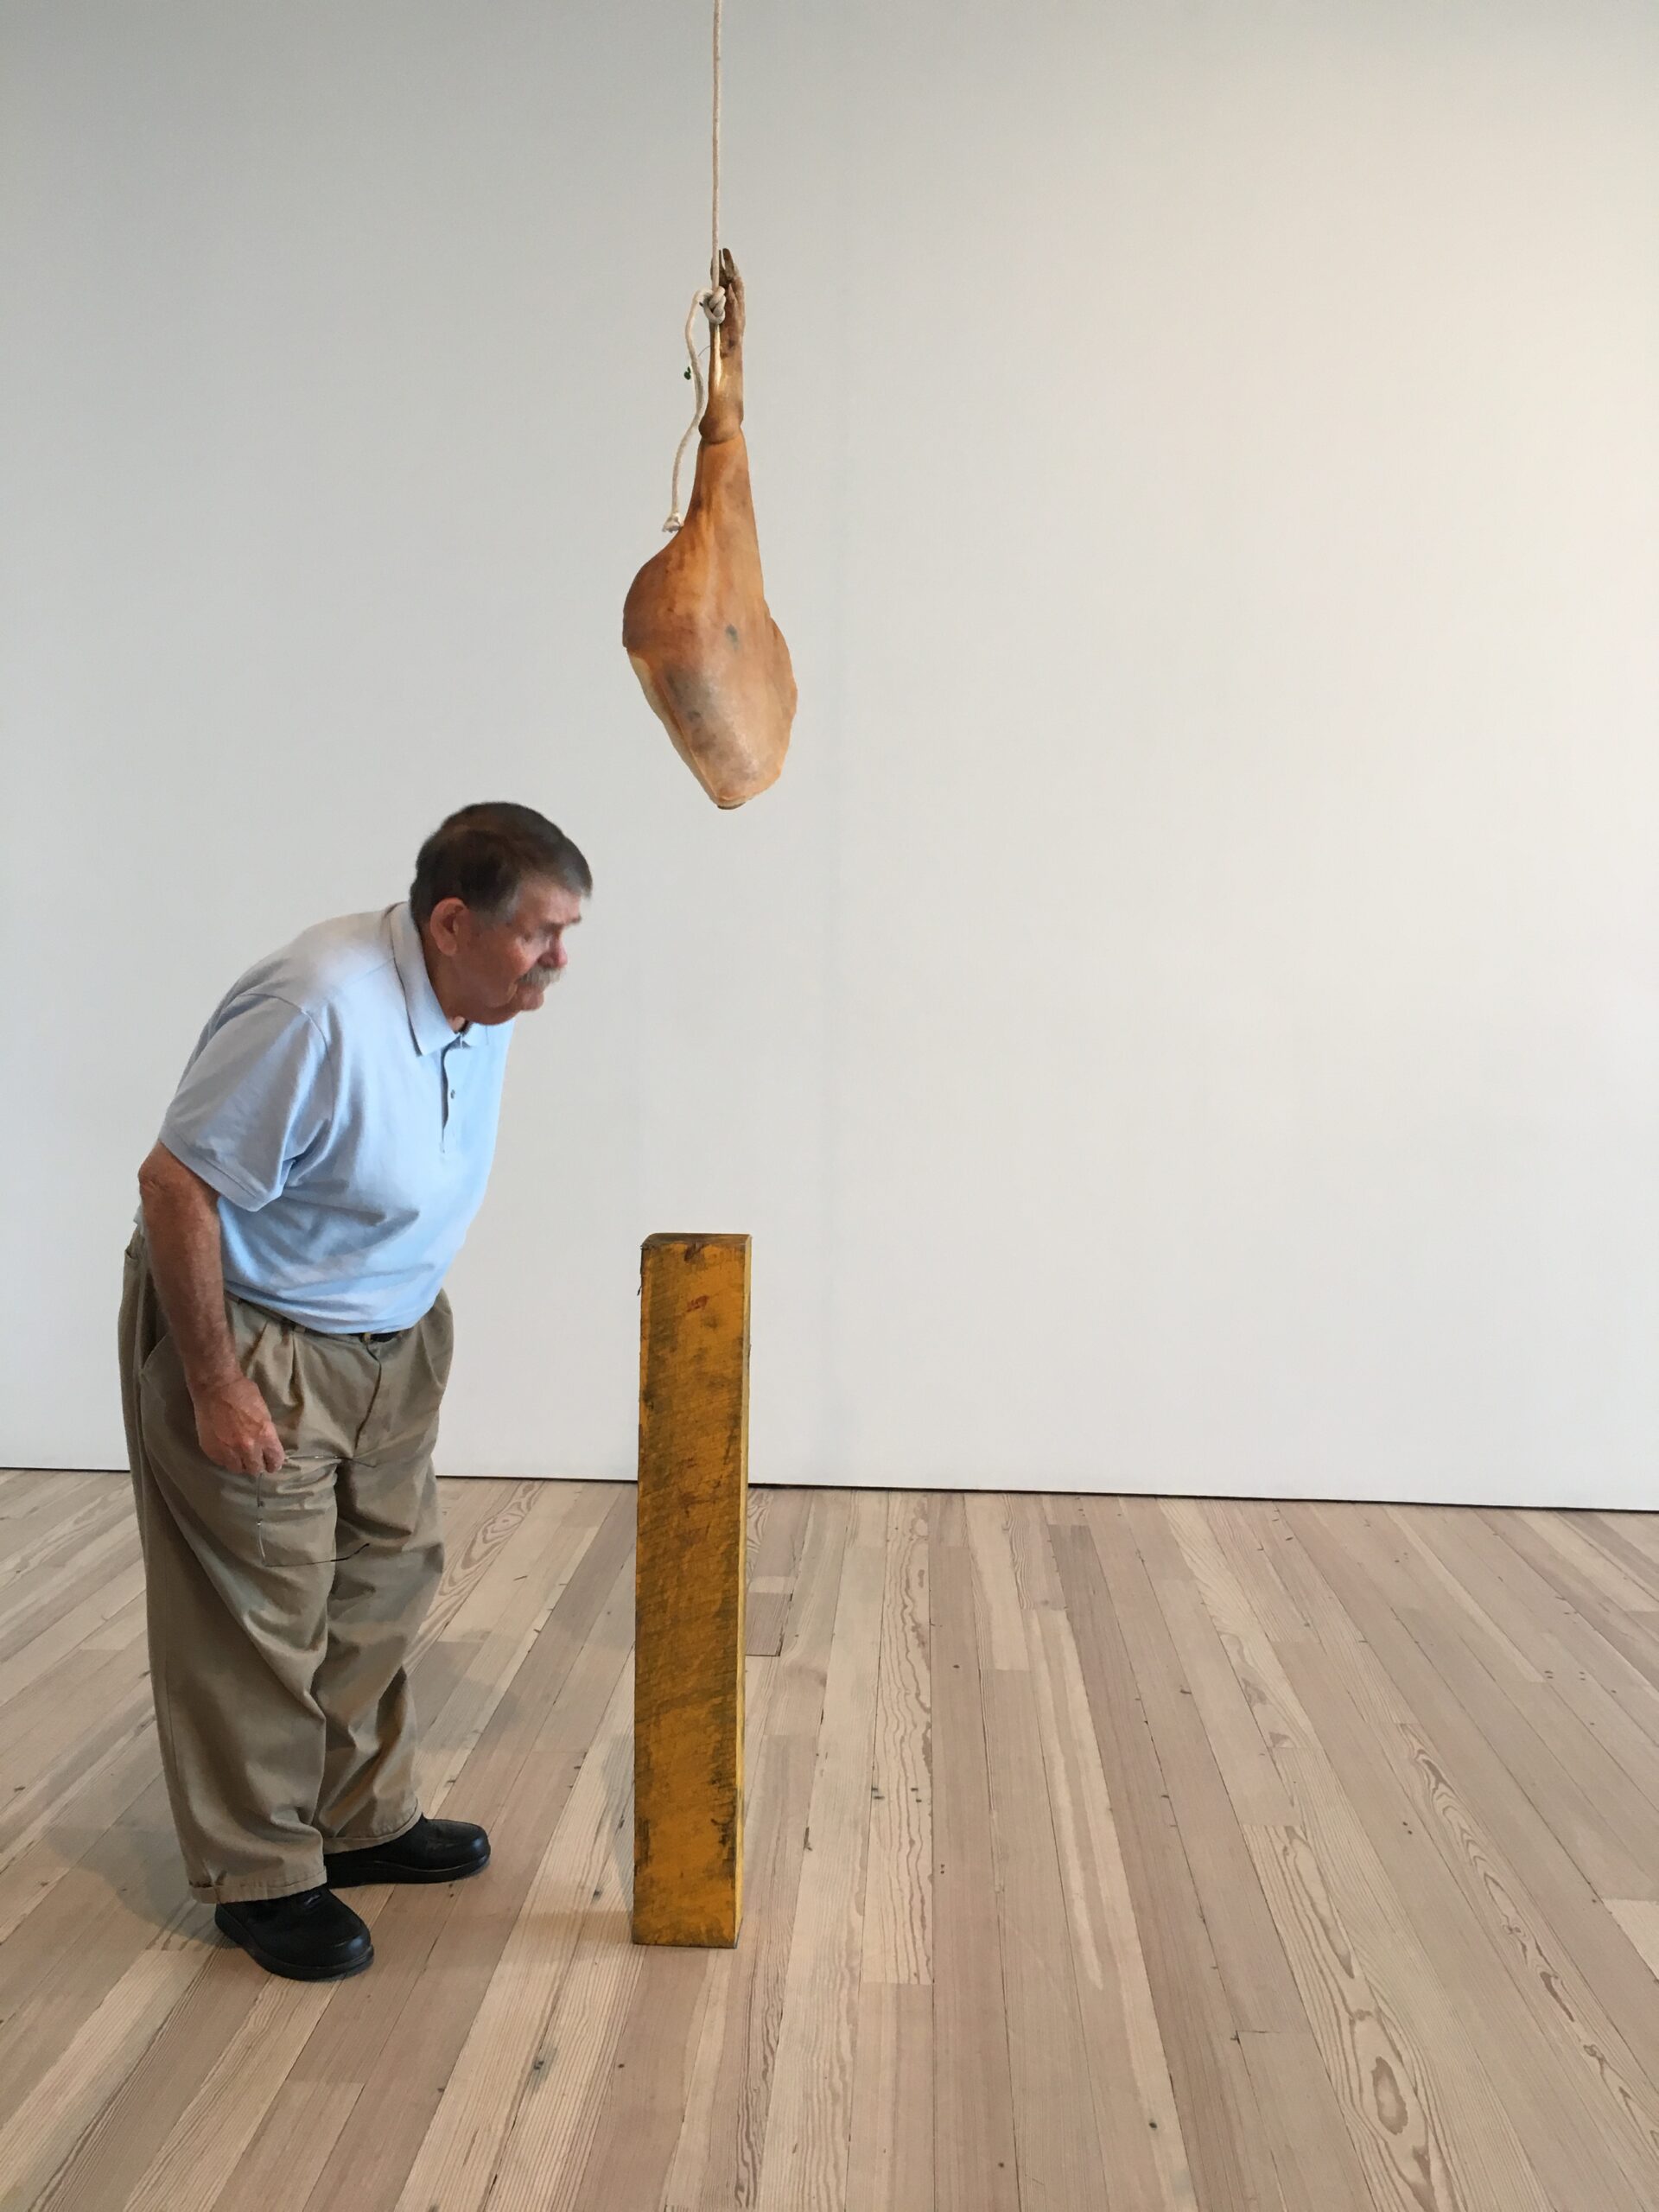 Man leaning over to look at a hanging ham and wood beam